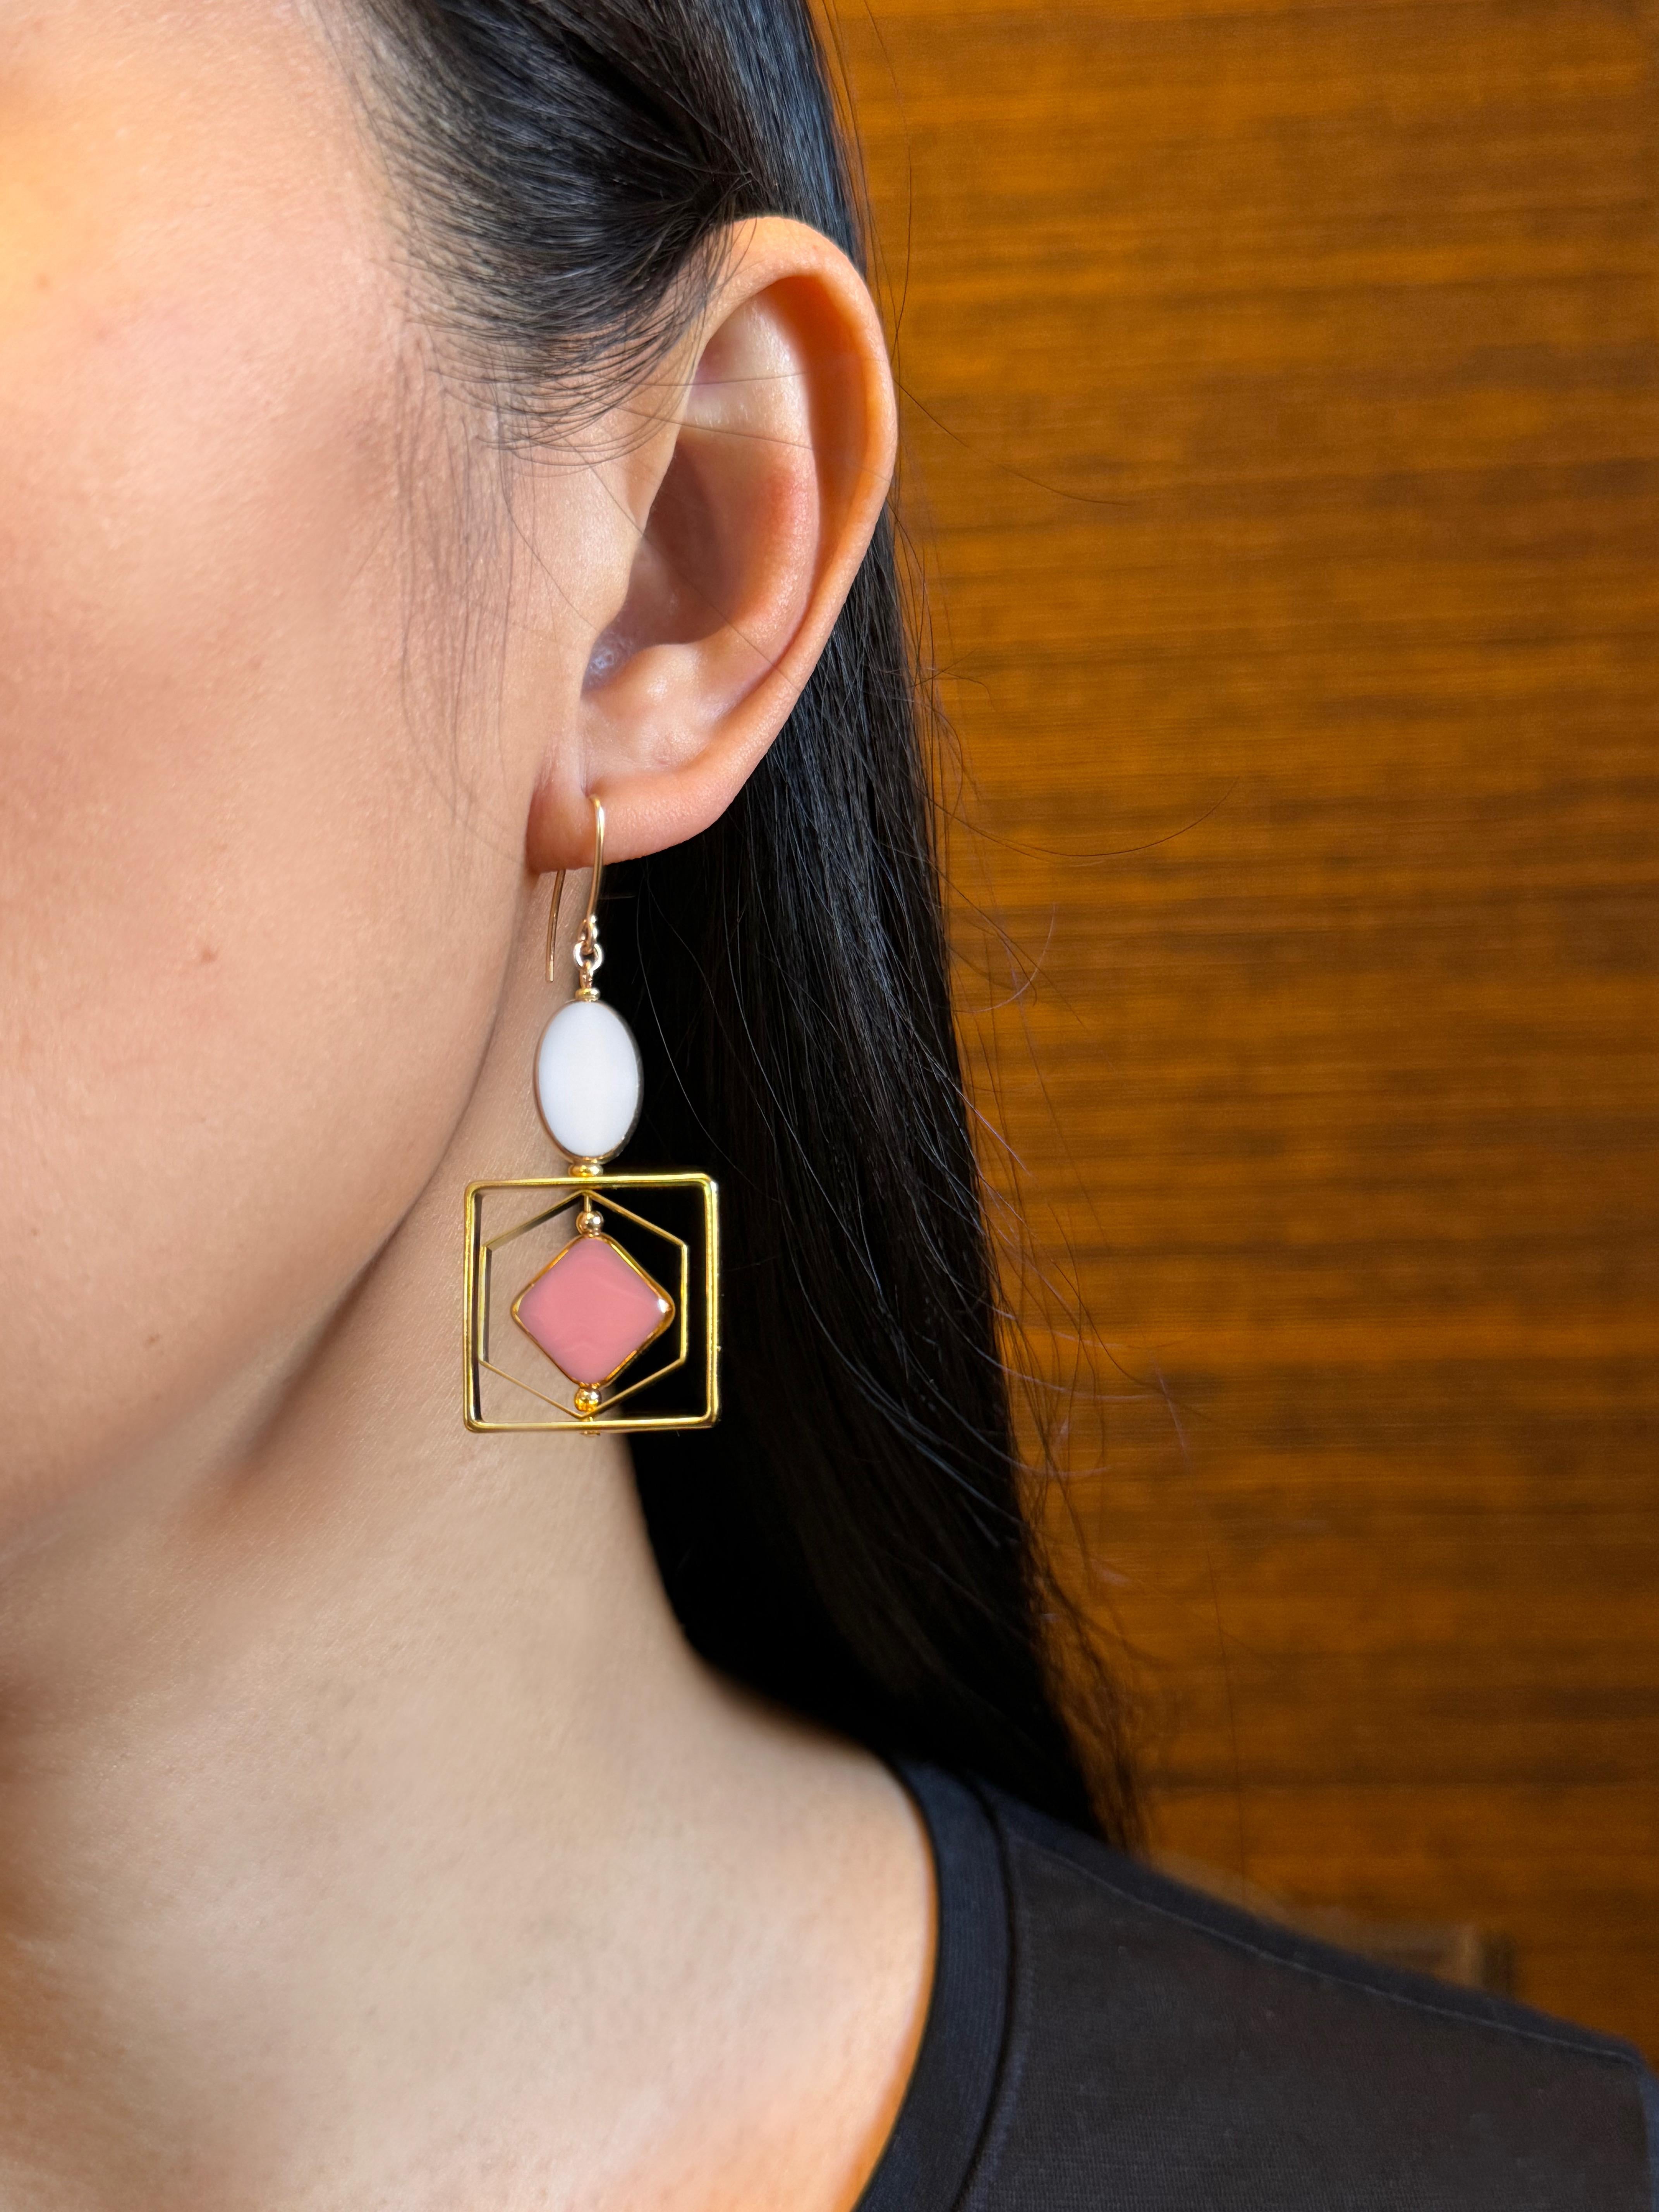 The earrings are light weight and are made to rotate and reposition with movement.

The earrings consist of white and pink new old stock vintage German glass beads that are framed with 24K gold. The beads were hand pressed during the 1920s-1960s in